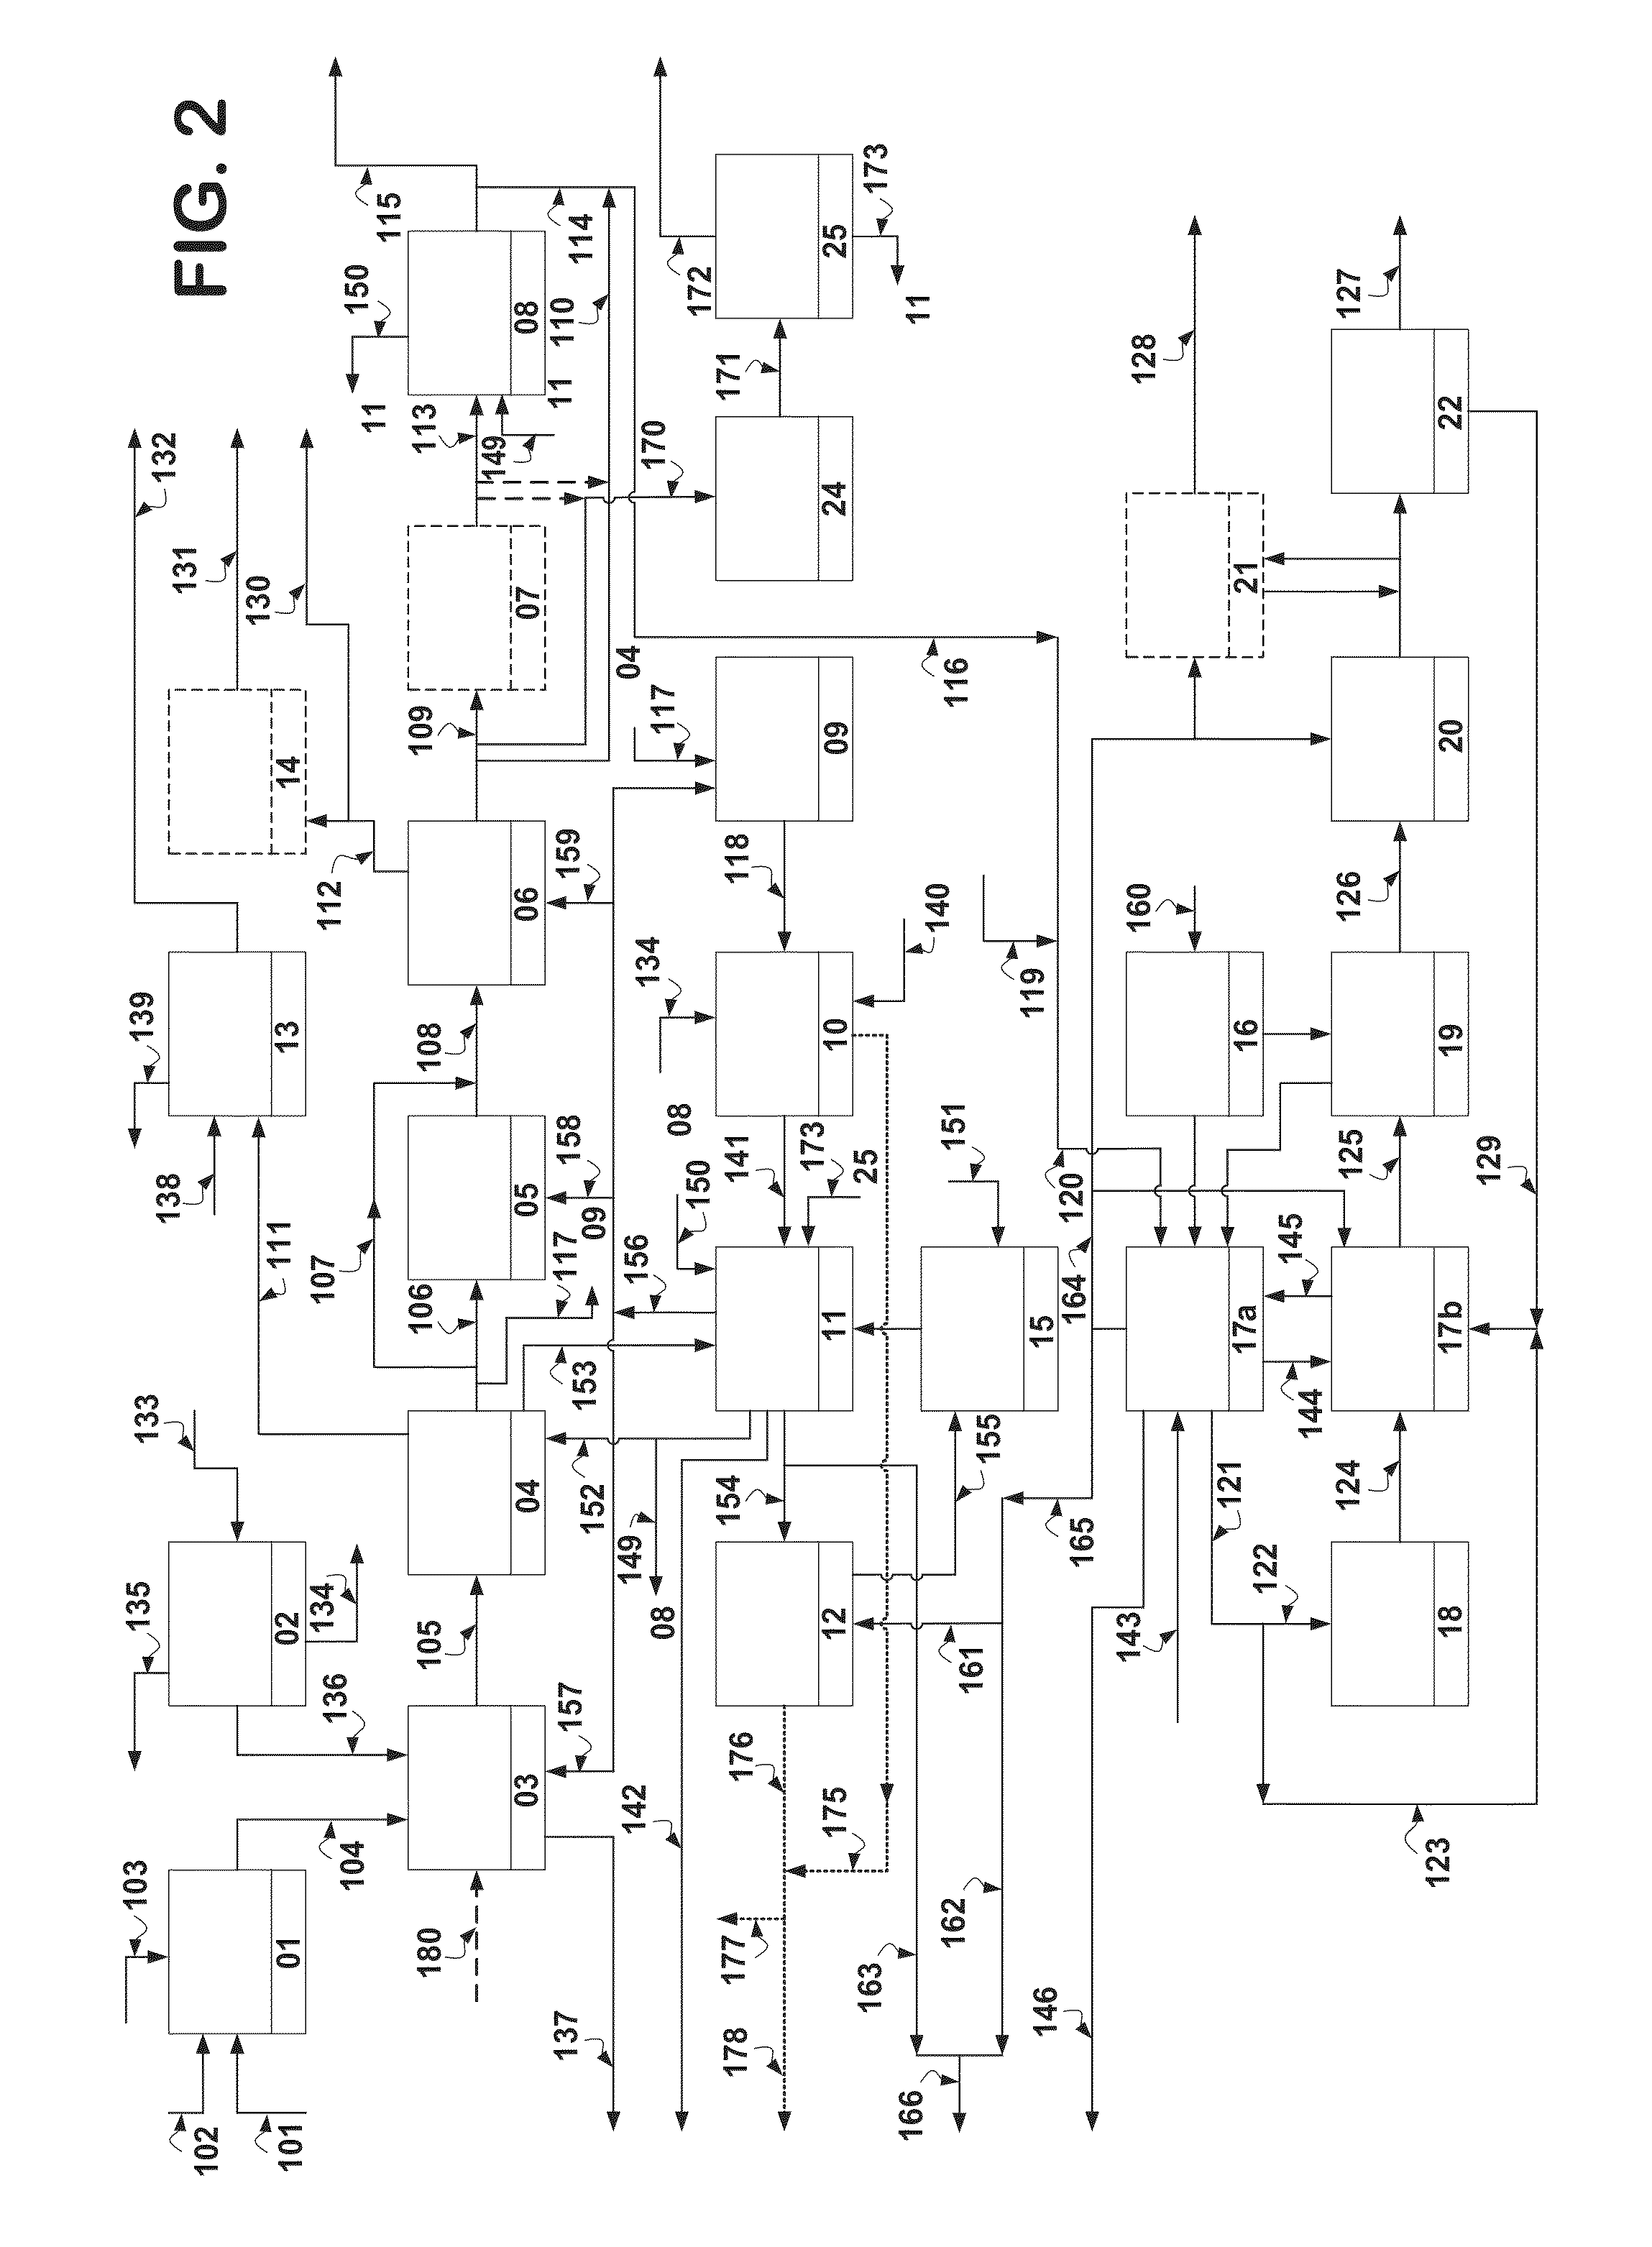 Gasification and steam methane reforming integrated polygeneration method and system